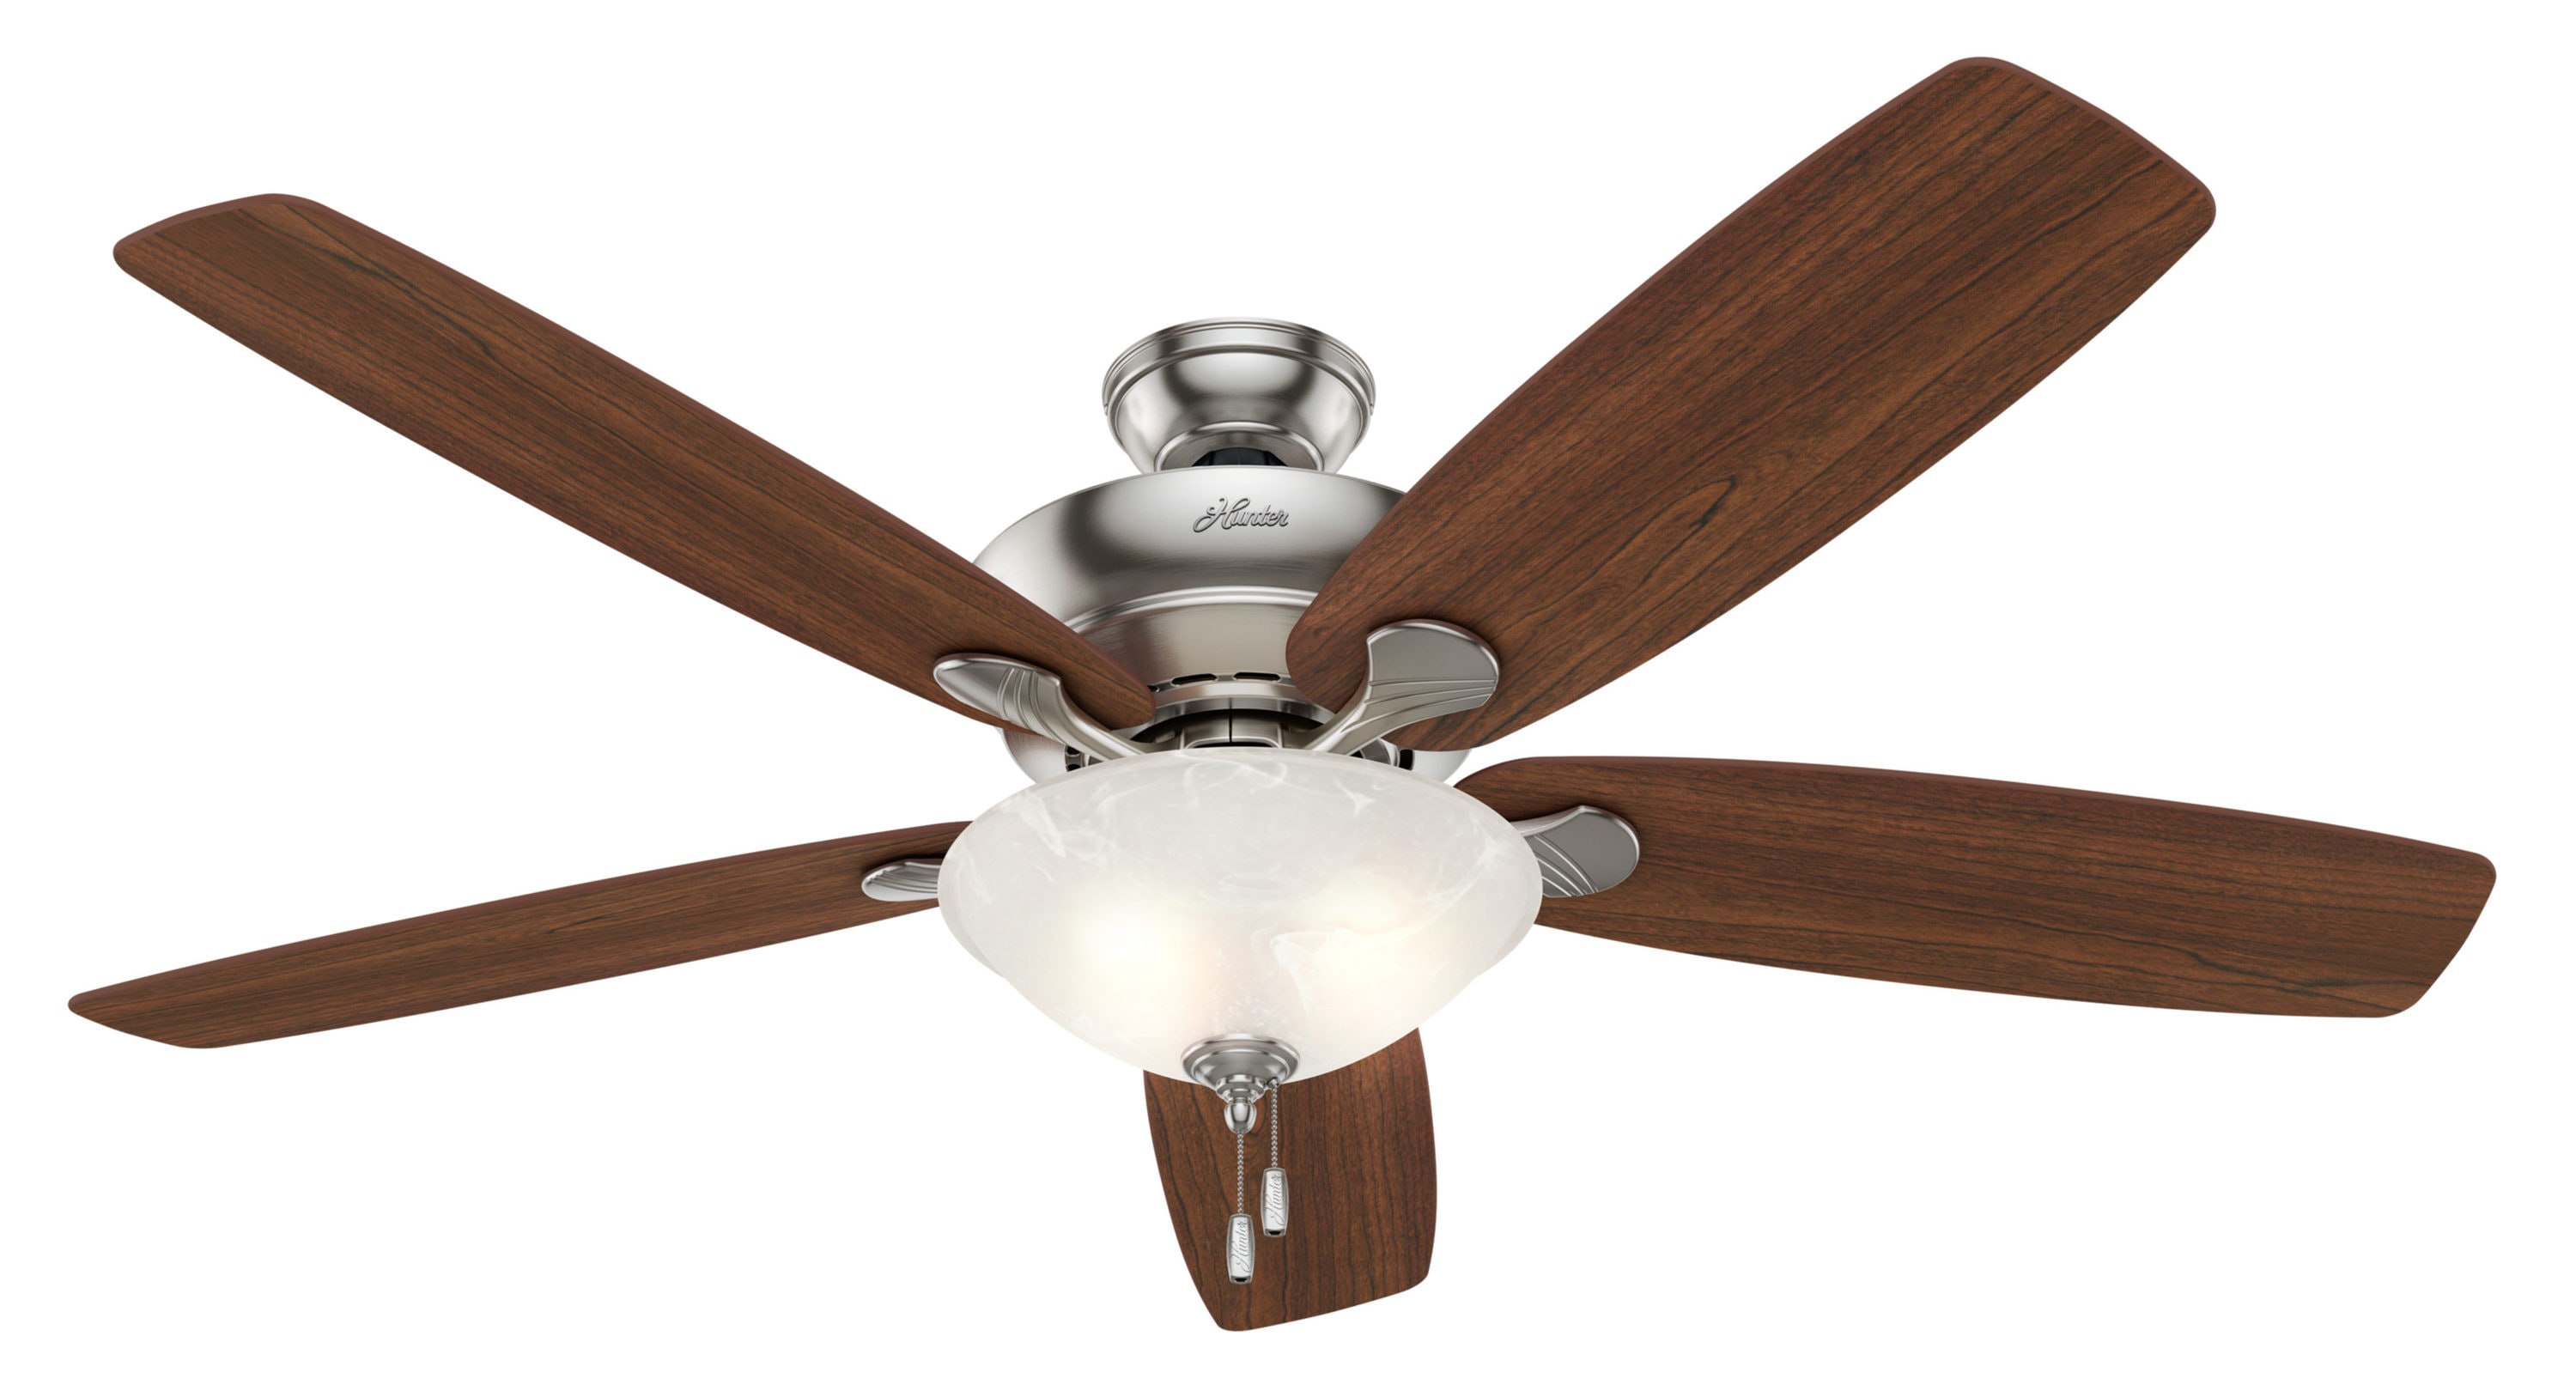 Regalia 60-in Fan at Hunter Downrod Flush (5-Blade) or Mount Brushed with Nickel Indoor Light Ceiling